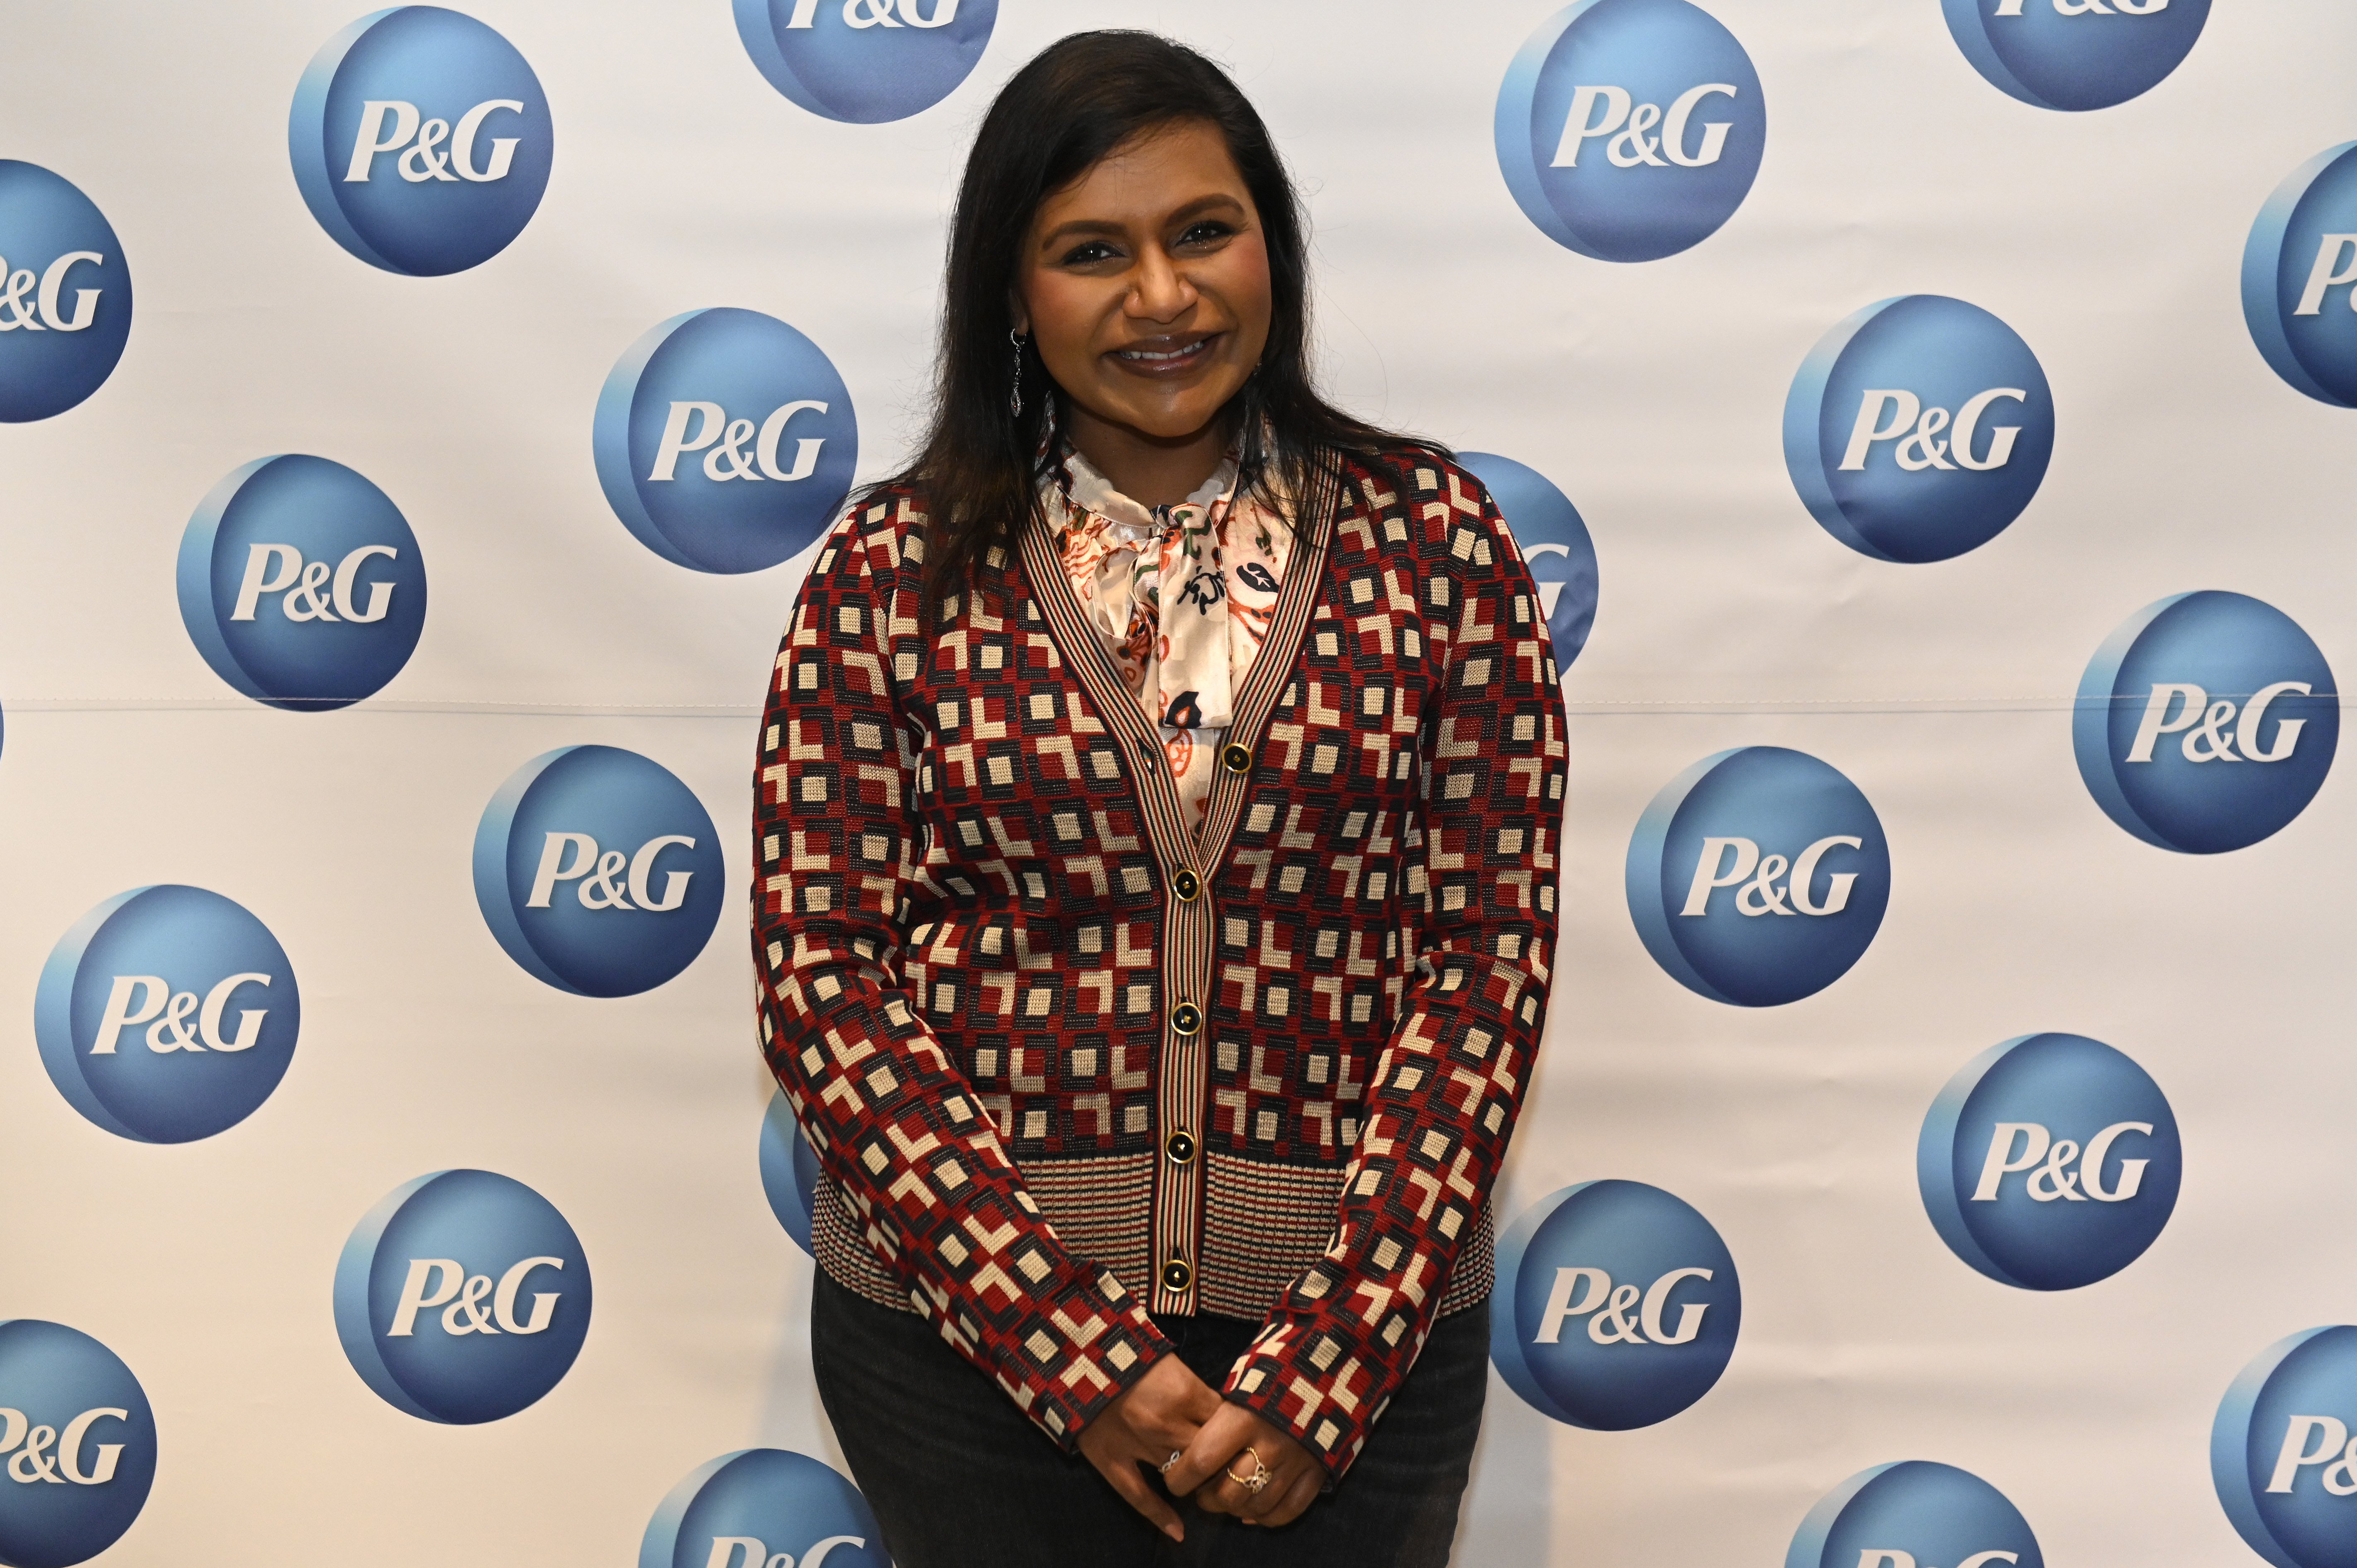 Mindy Kaling attends the P&G #WeSeeEqual Forum held at Proctor & Gamble on March 04, 2020 in Cincinnati, Ohio | Photo: Getty Images